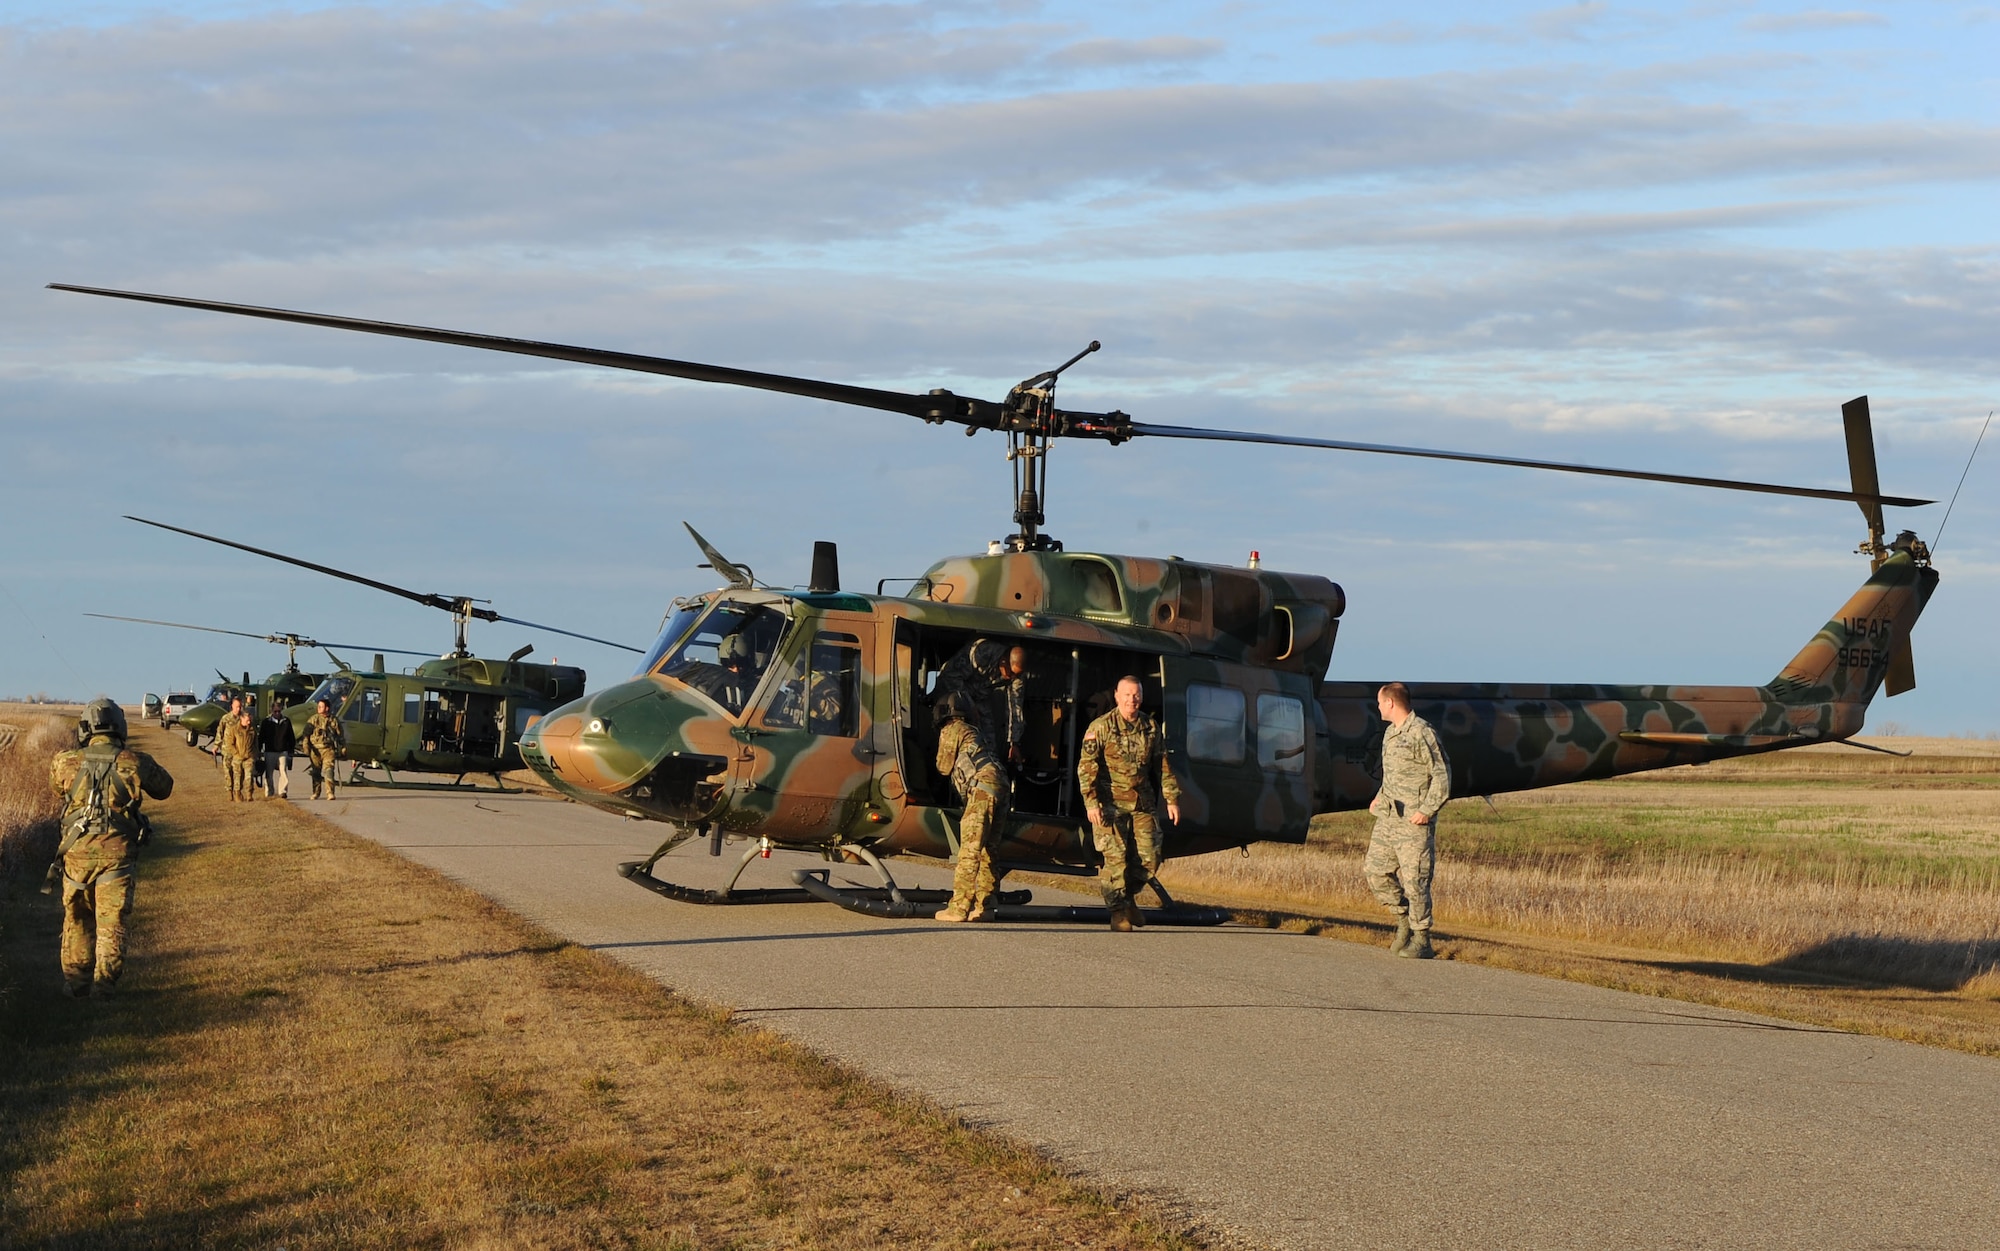 U.S. Marine Corps Gen. Joseph Dunford, chairman of the Joint Chiefs of Staff, lands via helicopter at a missile alert facility for a tour, N.D., Nov. 2, 2016. Dunford toured various 5th Bomb Wing and the 91st MW’s facilities to learn about their mission and capabilities. (U.S. Air Force photo/Senior Airman Kristoffer Kaubisch)